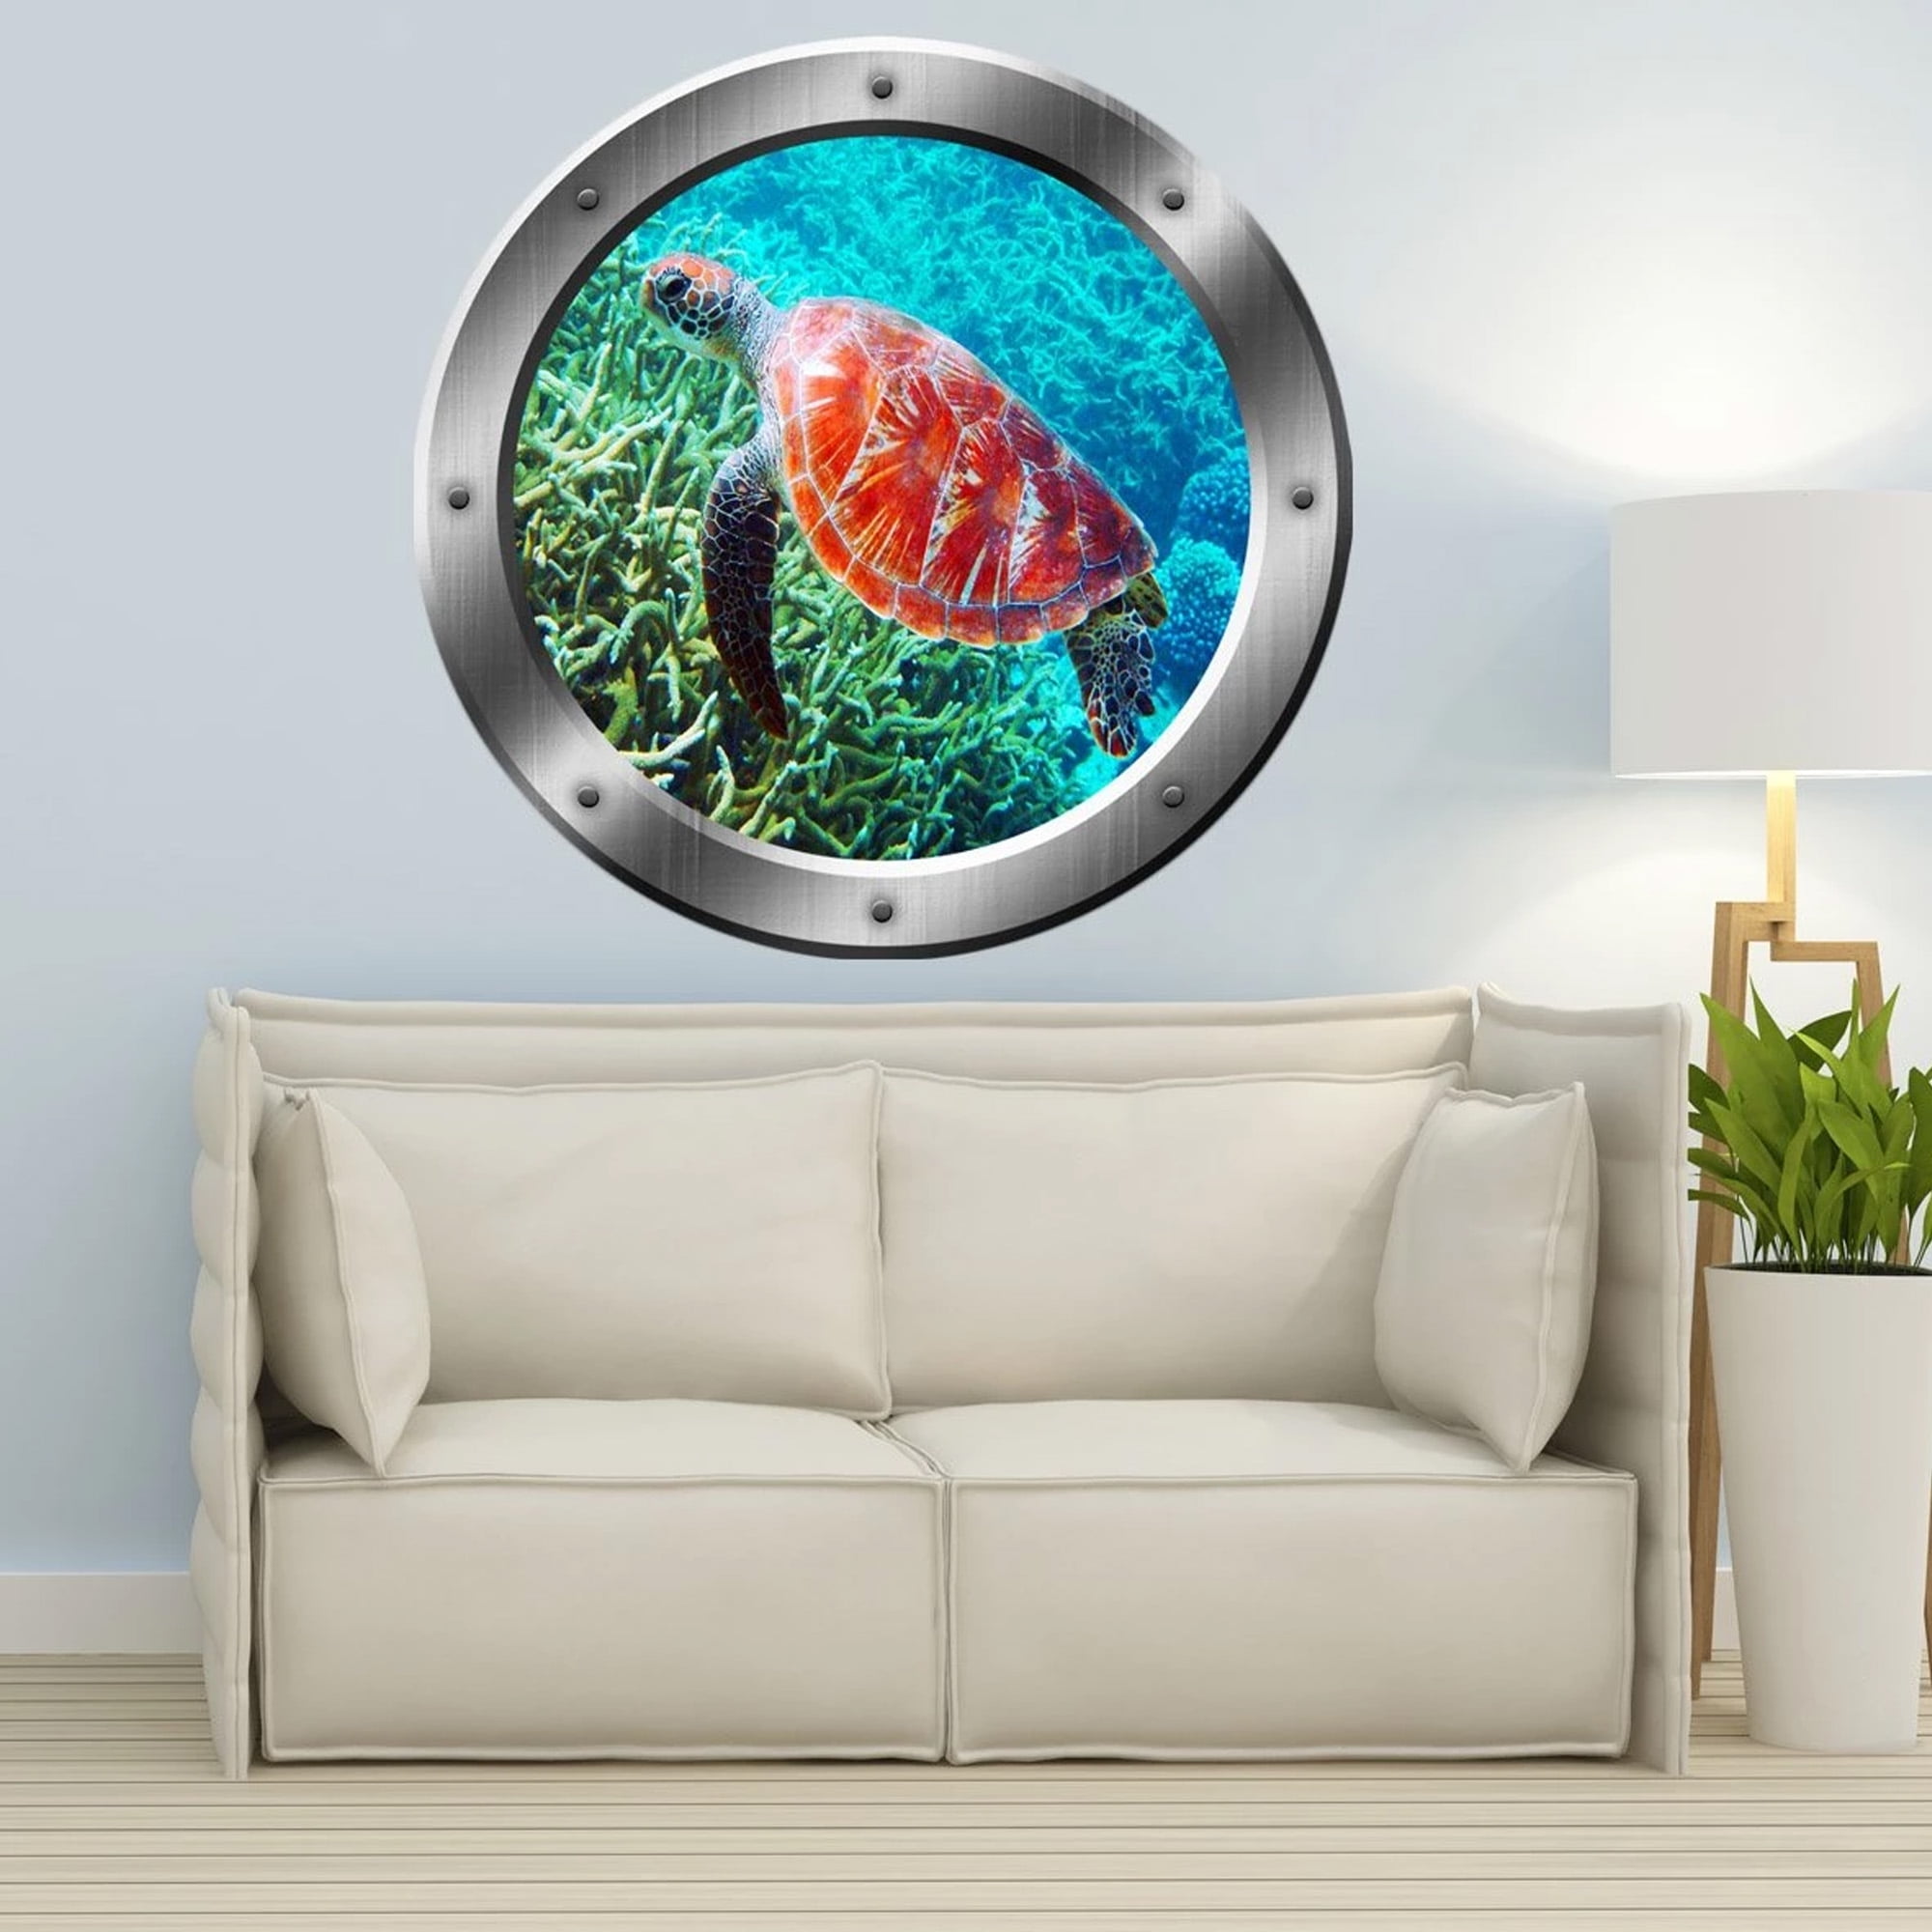 Sea Turtle Underwater 3D Hole in The Wall B Effect Wall Decal Sticker Mural 